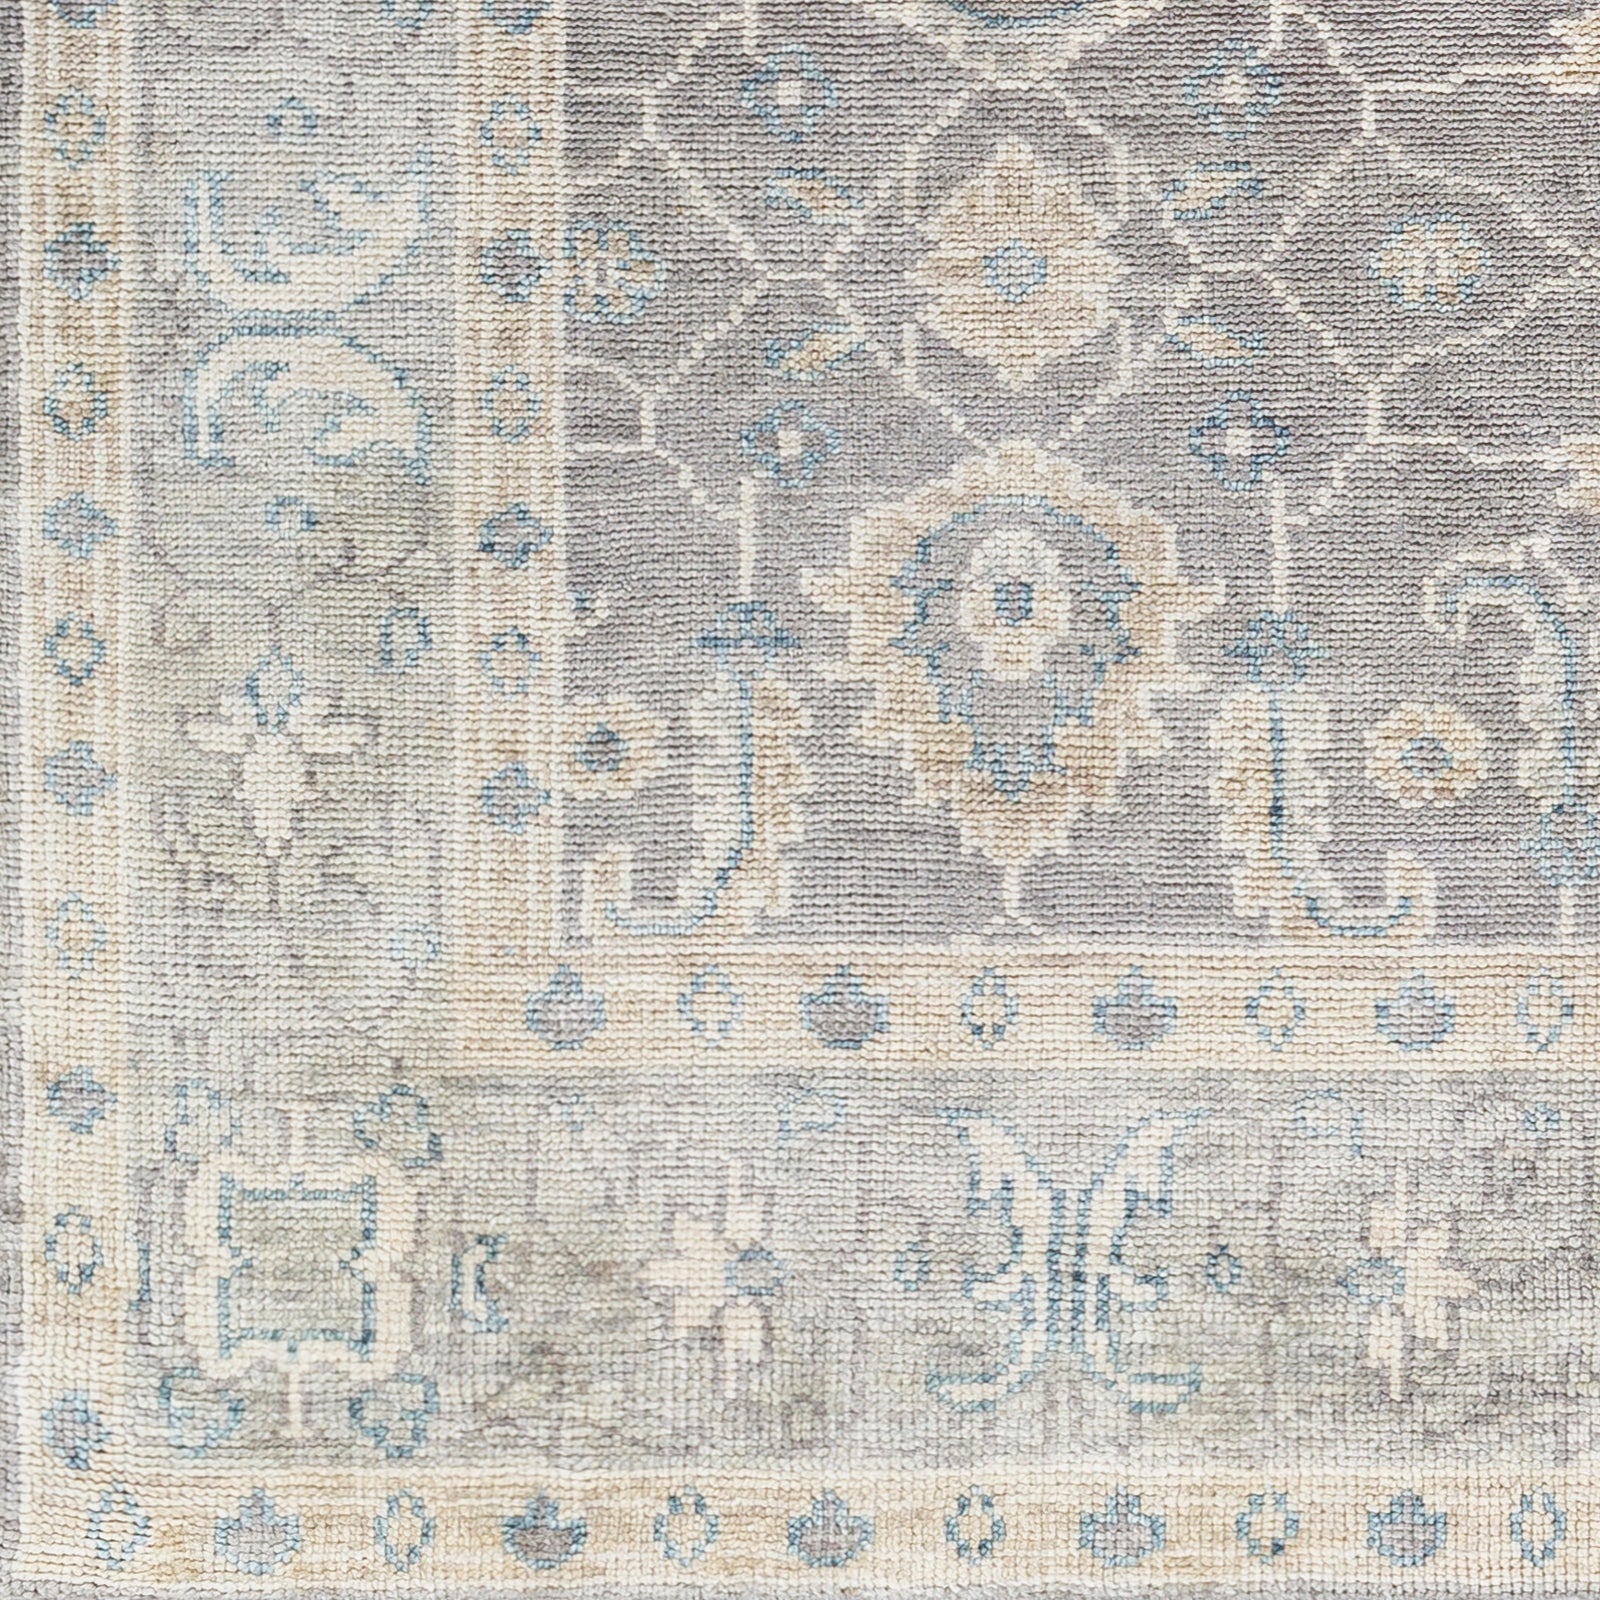 Give your space an air of sophistication with our Palais Hand-Knotted Rug. Crafted with 100% wool in hues of charcoal, ivory, seafoam, and taupe, the rug features a soft texture and is contrasted with a deep center and bright border for an artful look. Perfect for adding depth and character to any room. Amethyst Home provides interior design, new construction, custom furniture, and area rugs in the Hamptons metro area